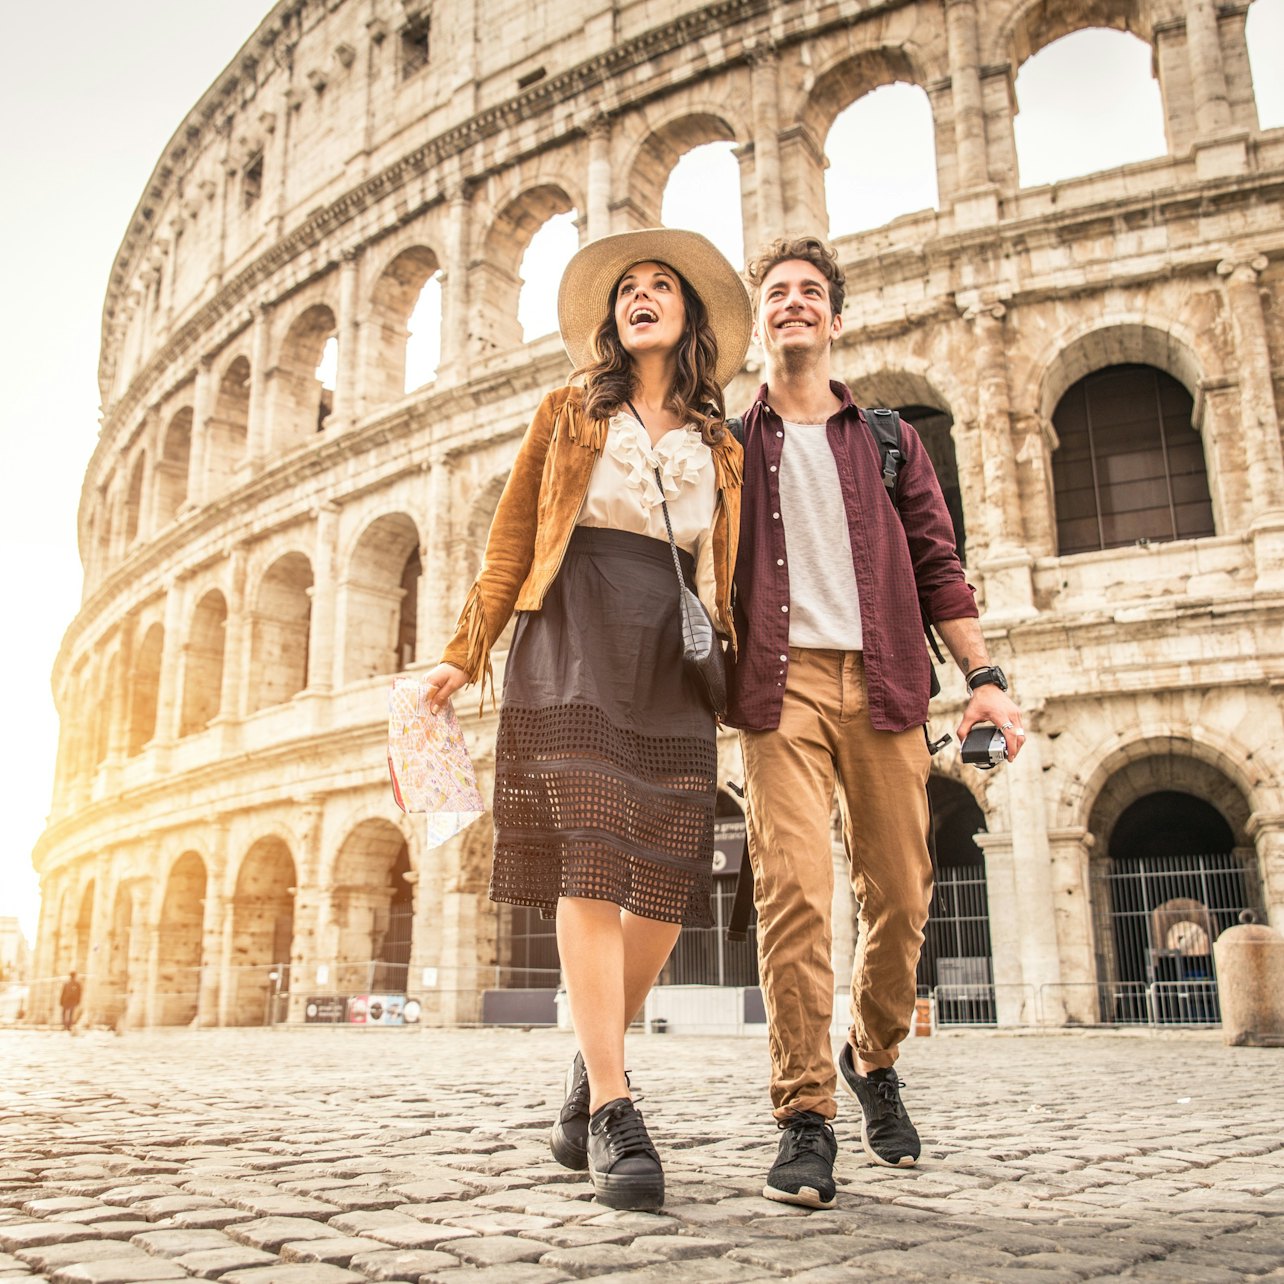 Colosseum: Express Guided Tour - Accommodations in Rome